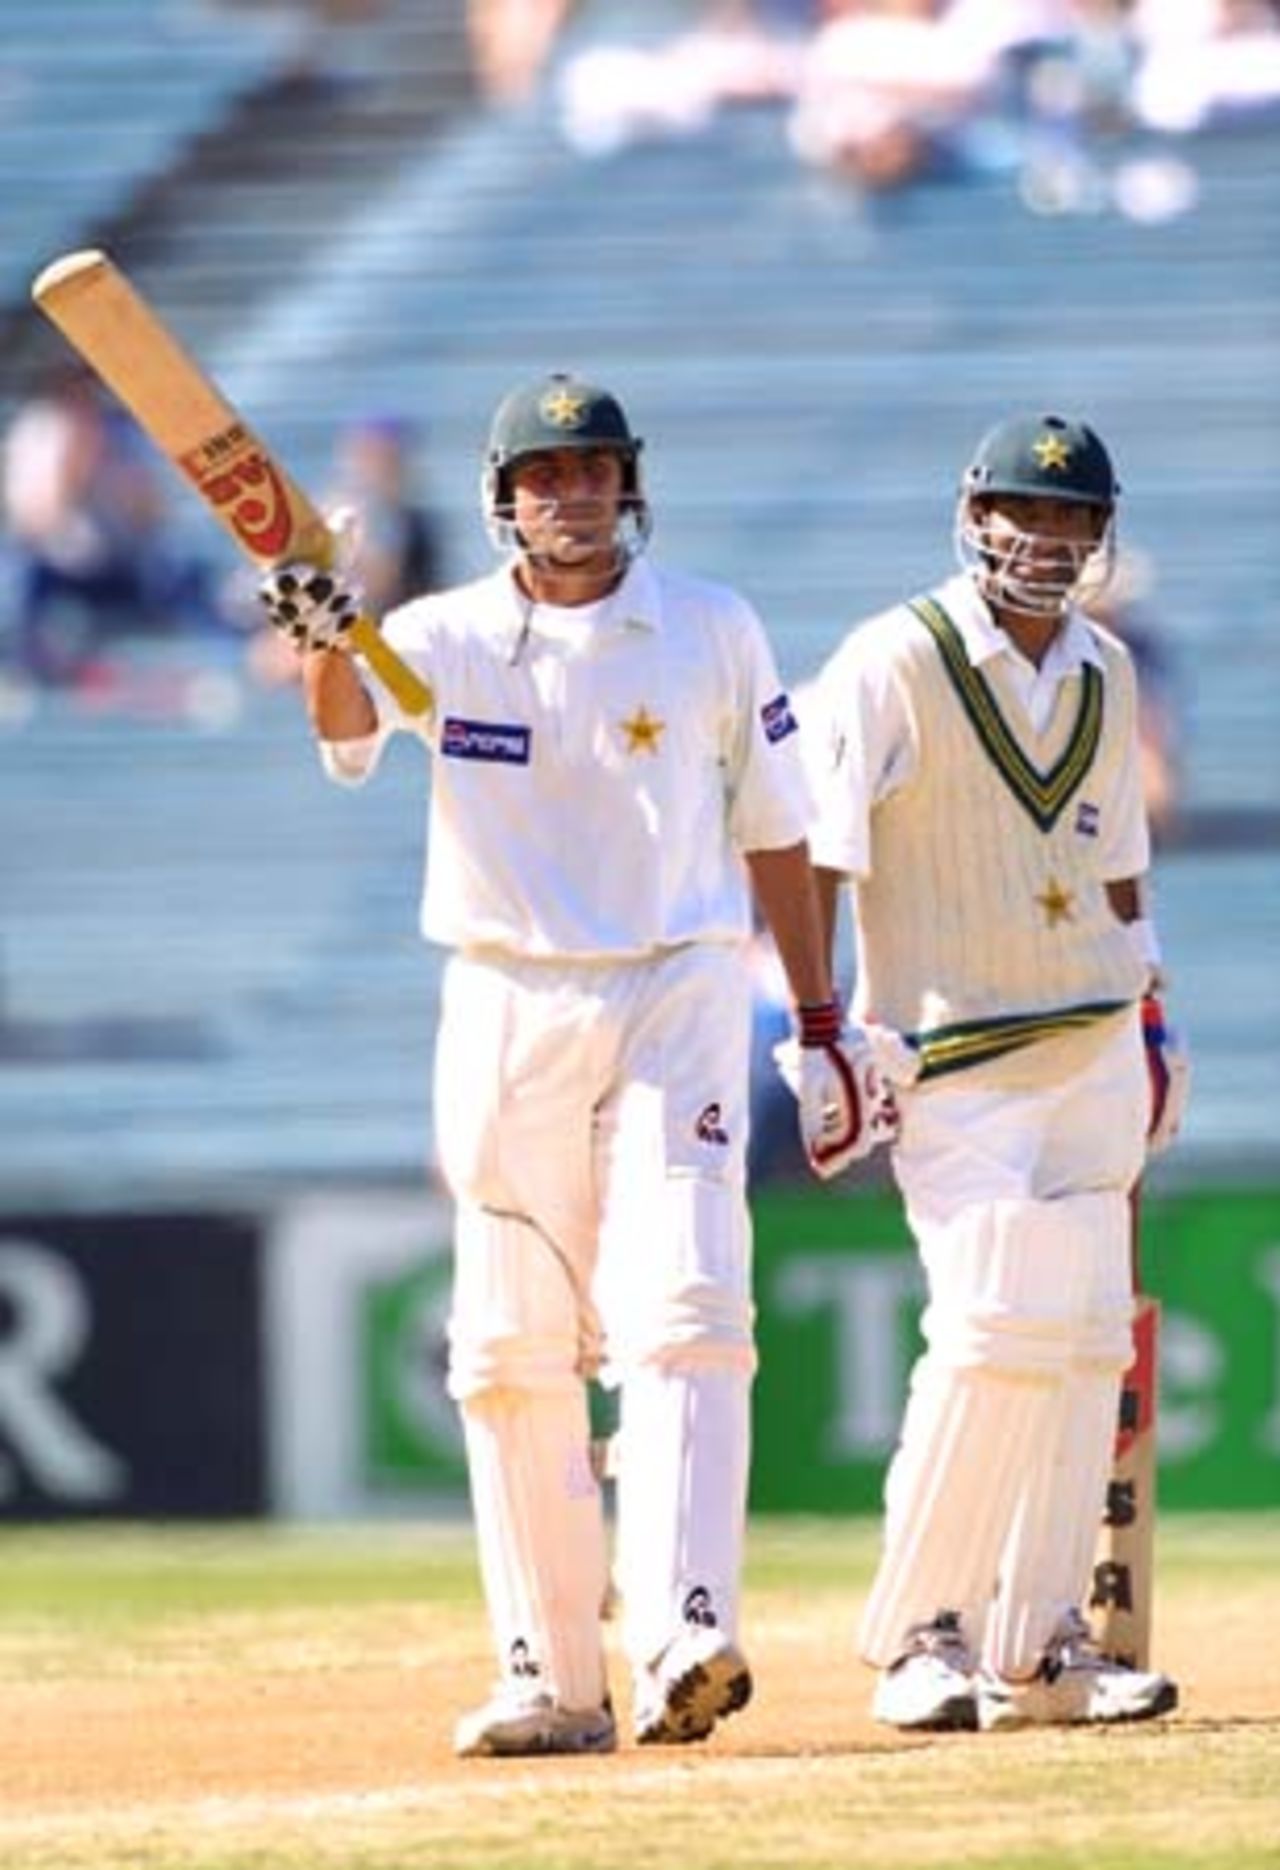 Pakistan batsman Younis Khan raises his bat in celebration of reaching 50 in his second innings, while batting partner Yousuf Youhana looks on. Younis went on to score 149 not out, his third Test century in his 10th Test. 1st Test: New Zealand v Pakistan at Eden Park, Auckland, 8-12 March 2001 (11 March 2001).